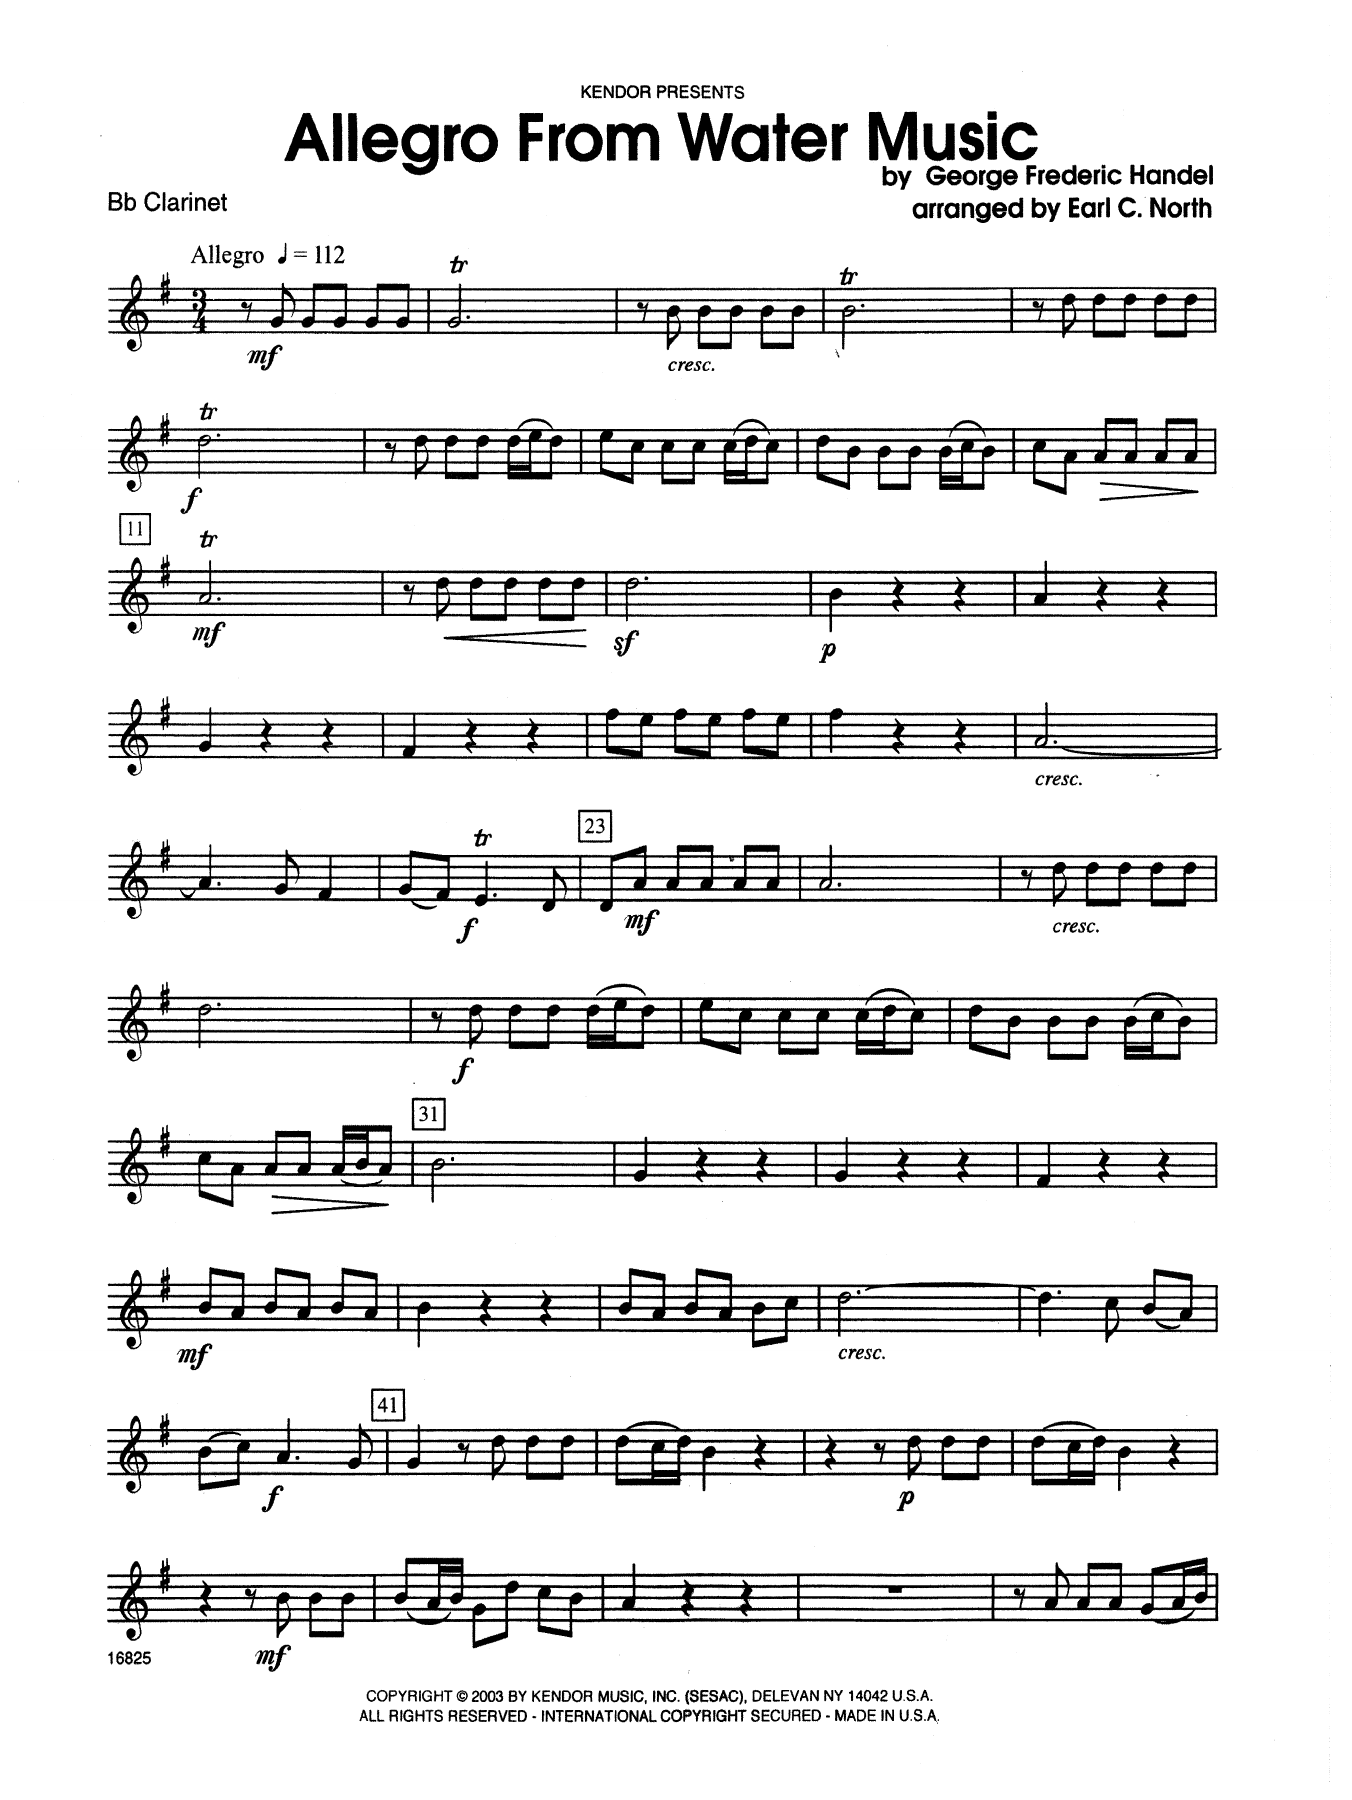 Earl North Allegro From Water Music - Bb Clarinet sheet music notes and chords. Download Printable PDF.